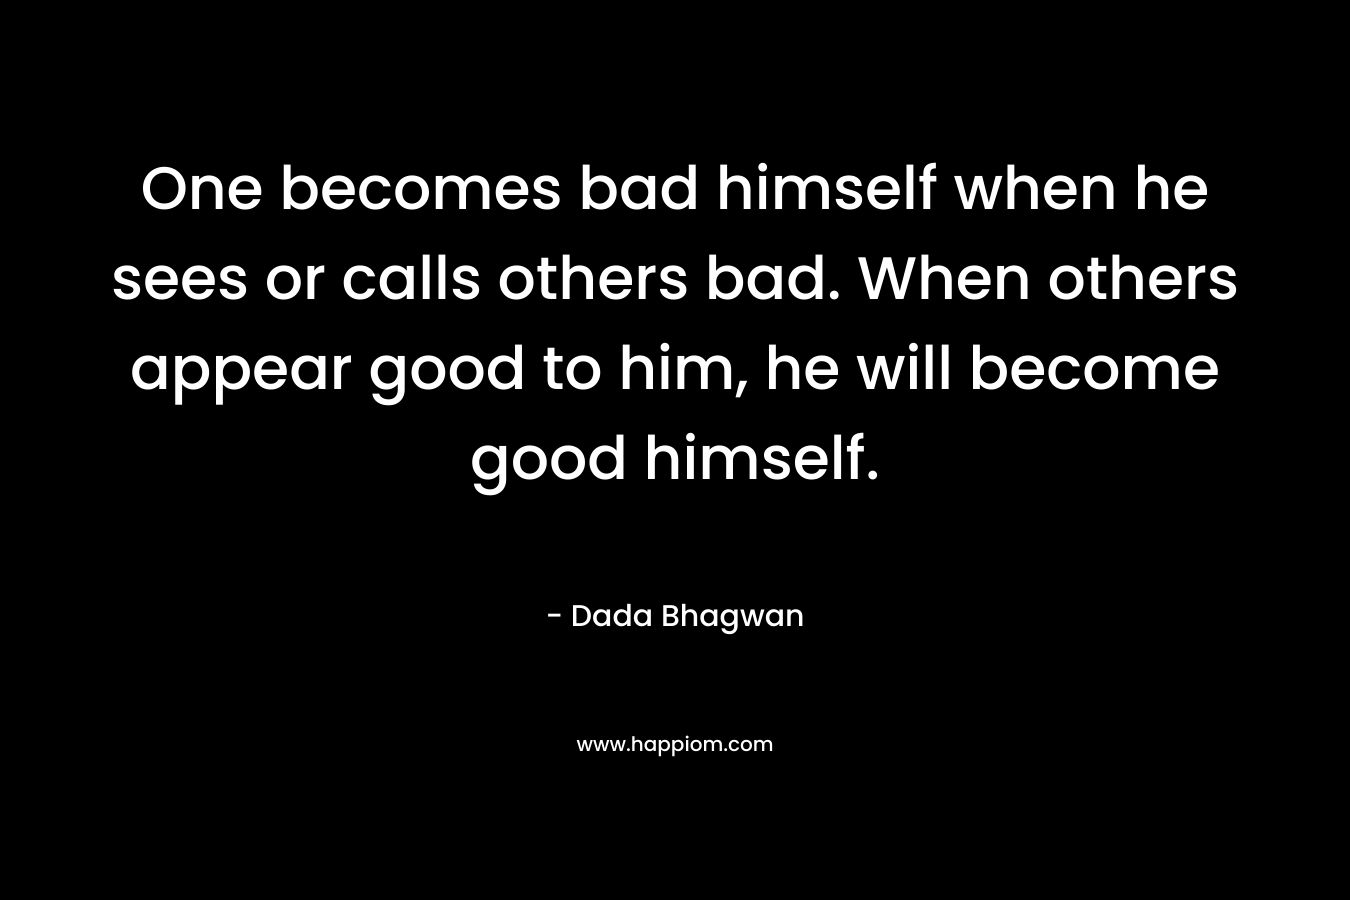 One becomes bad himself when he sees or calls others bad. When others appear good to him, he will become good himself.